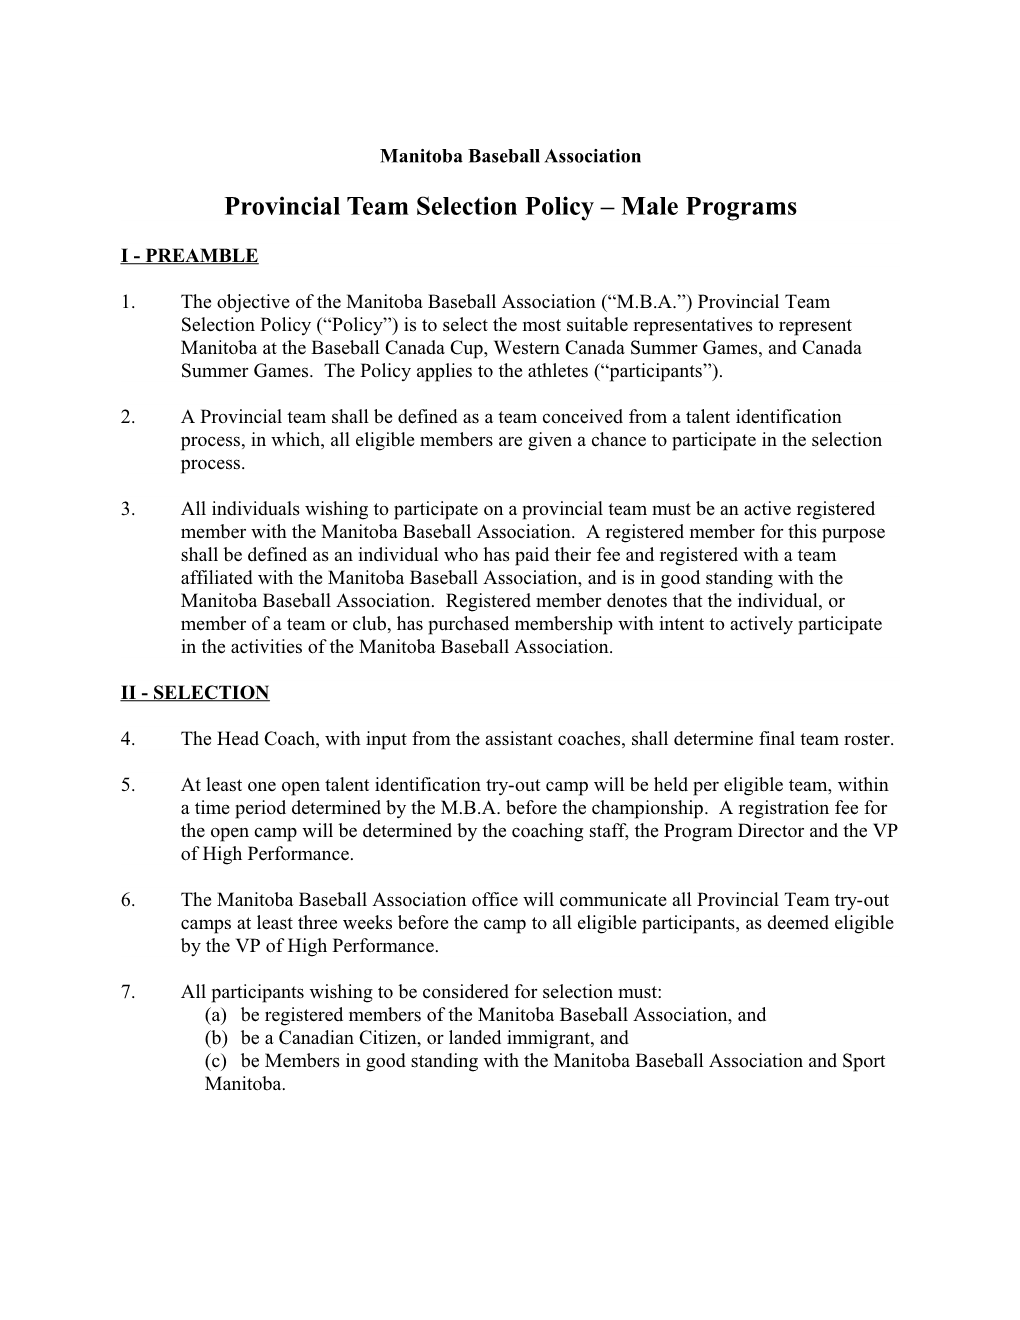 Provincial Team Selection Policy